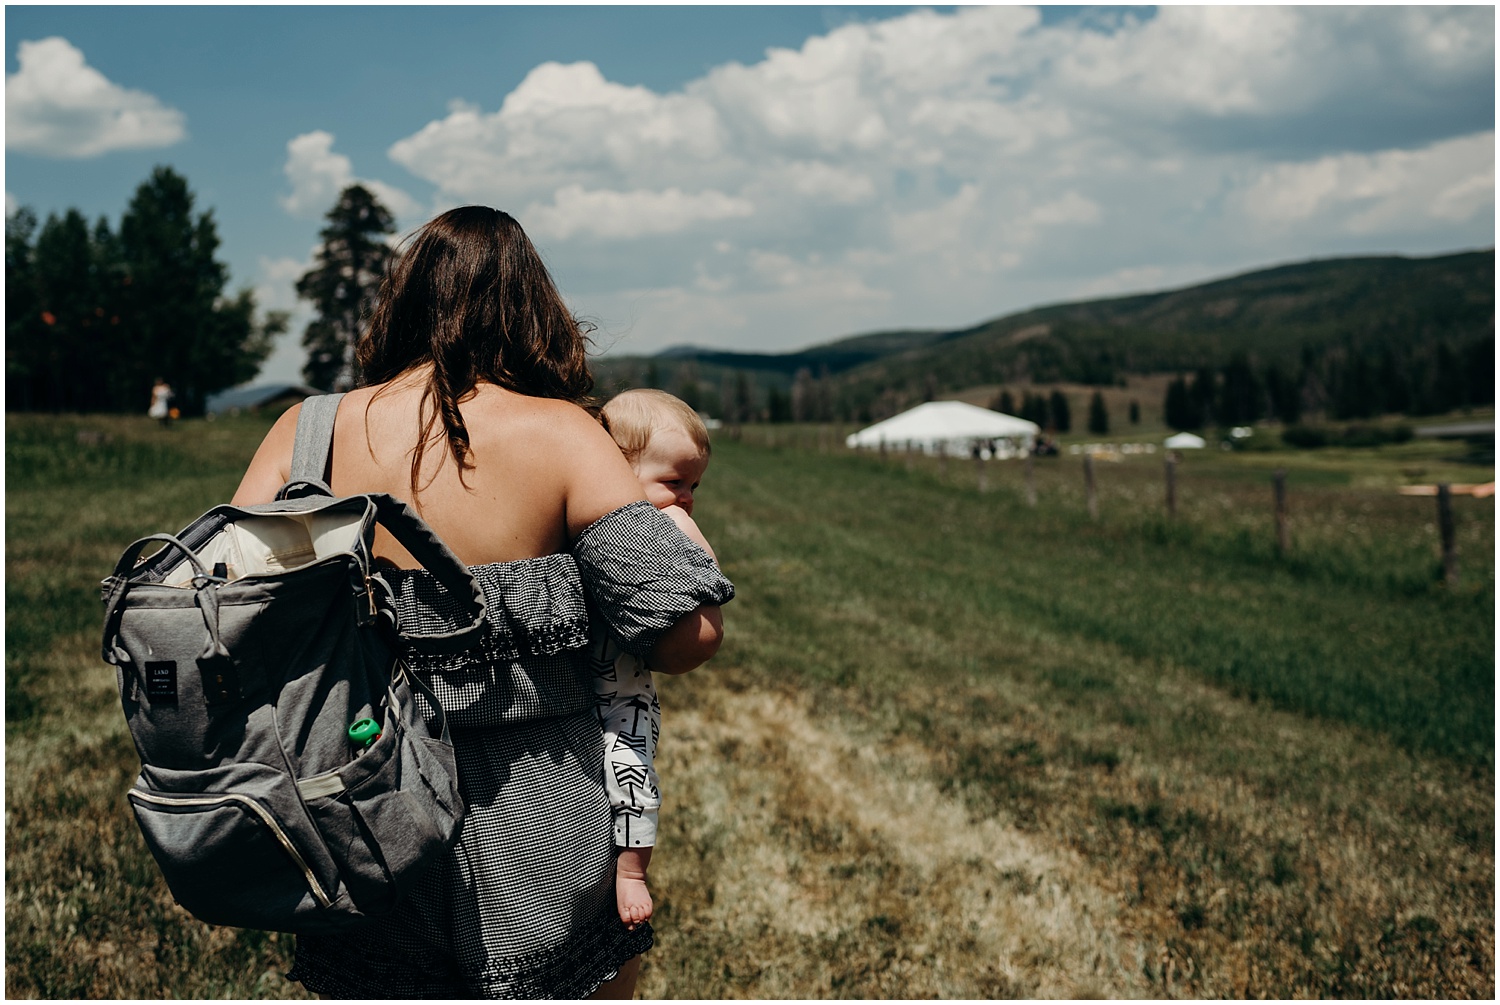 Outdoor wedding in Steamboat, Colorado documented with photojournalism